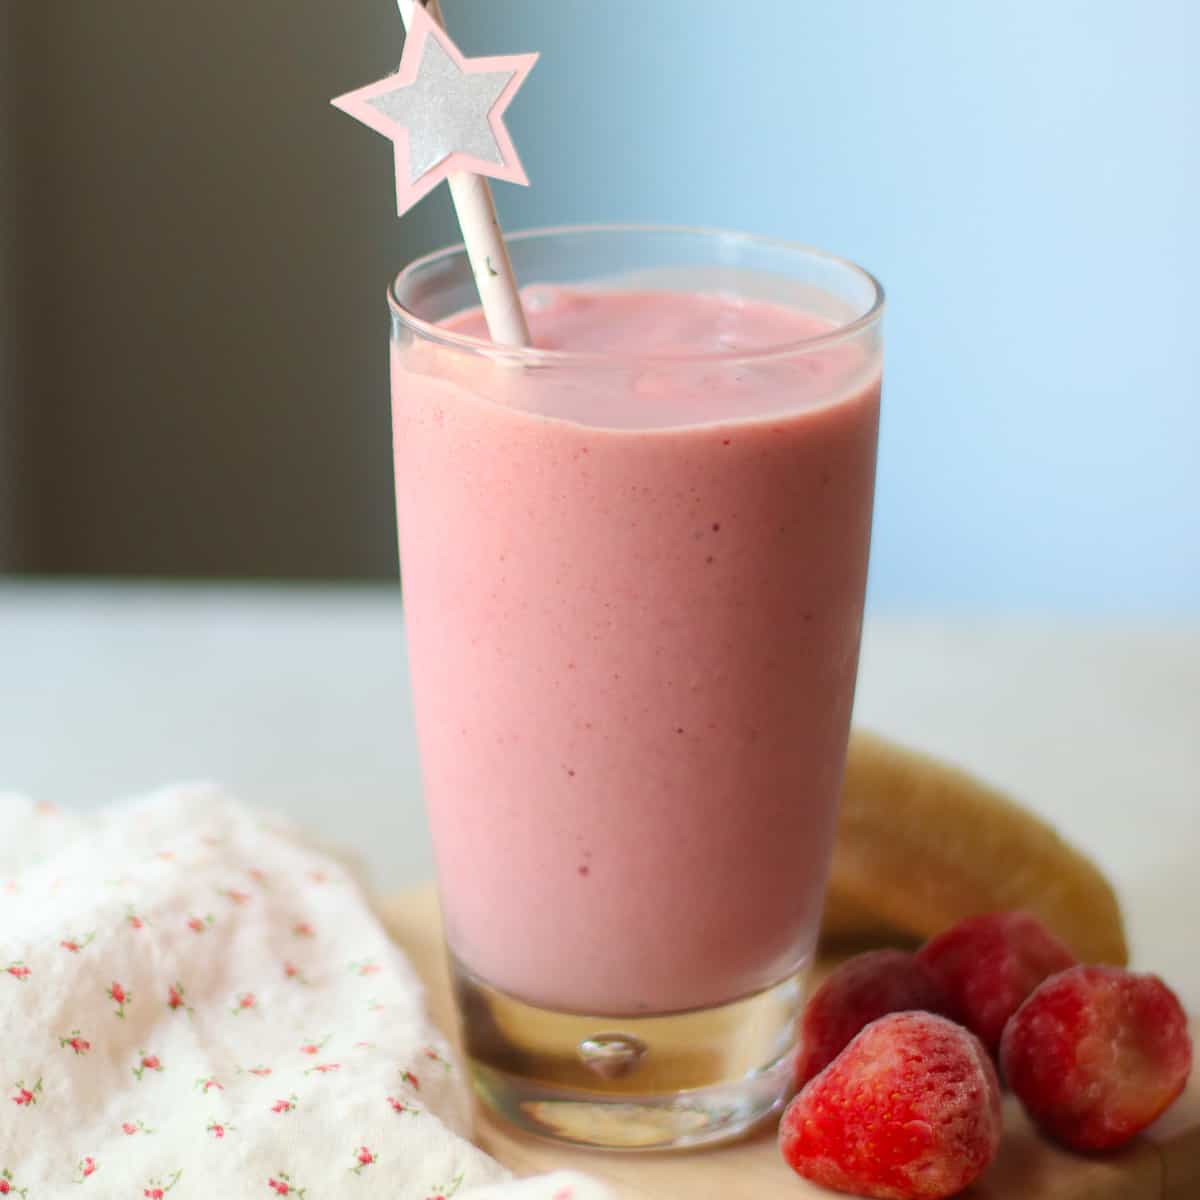 Strawberry banana milkshake in a glass with a straw and strawberries in the background.